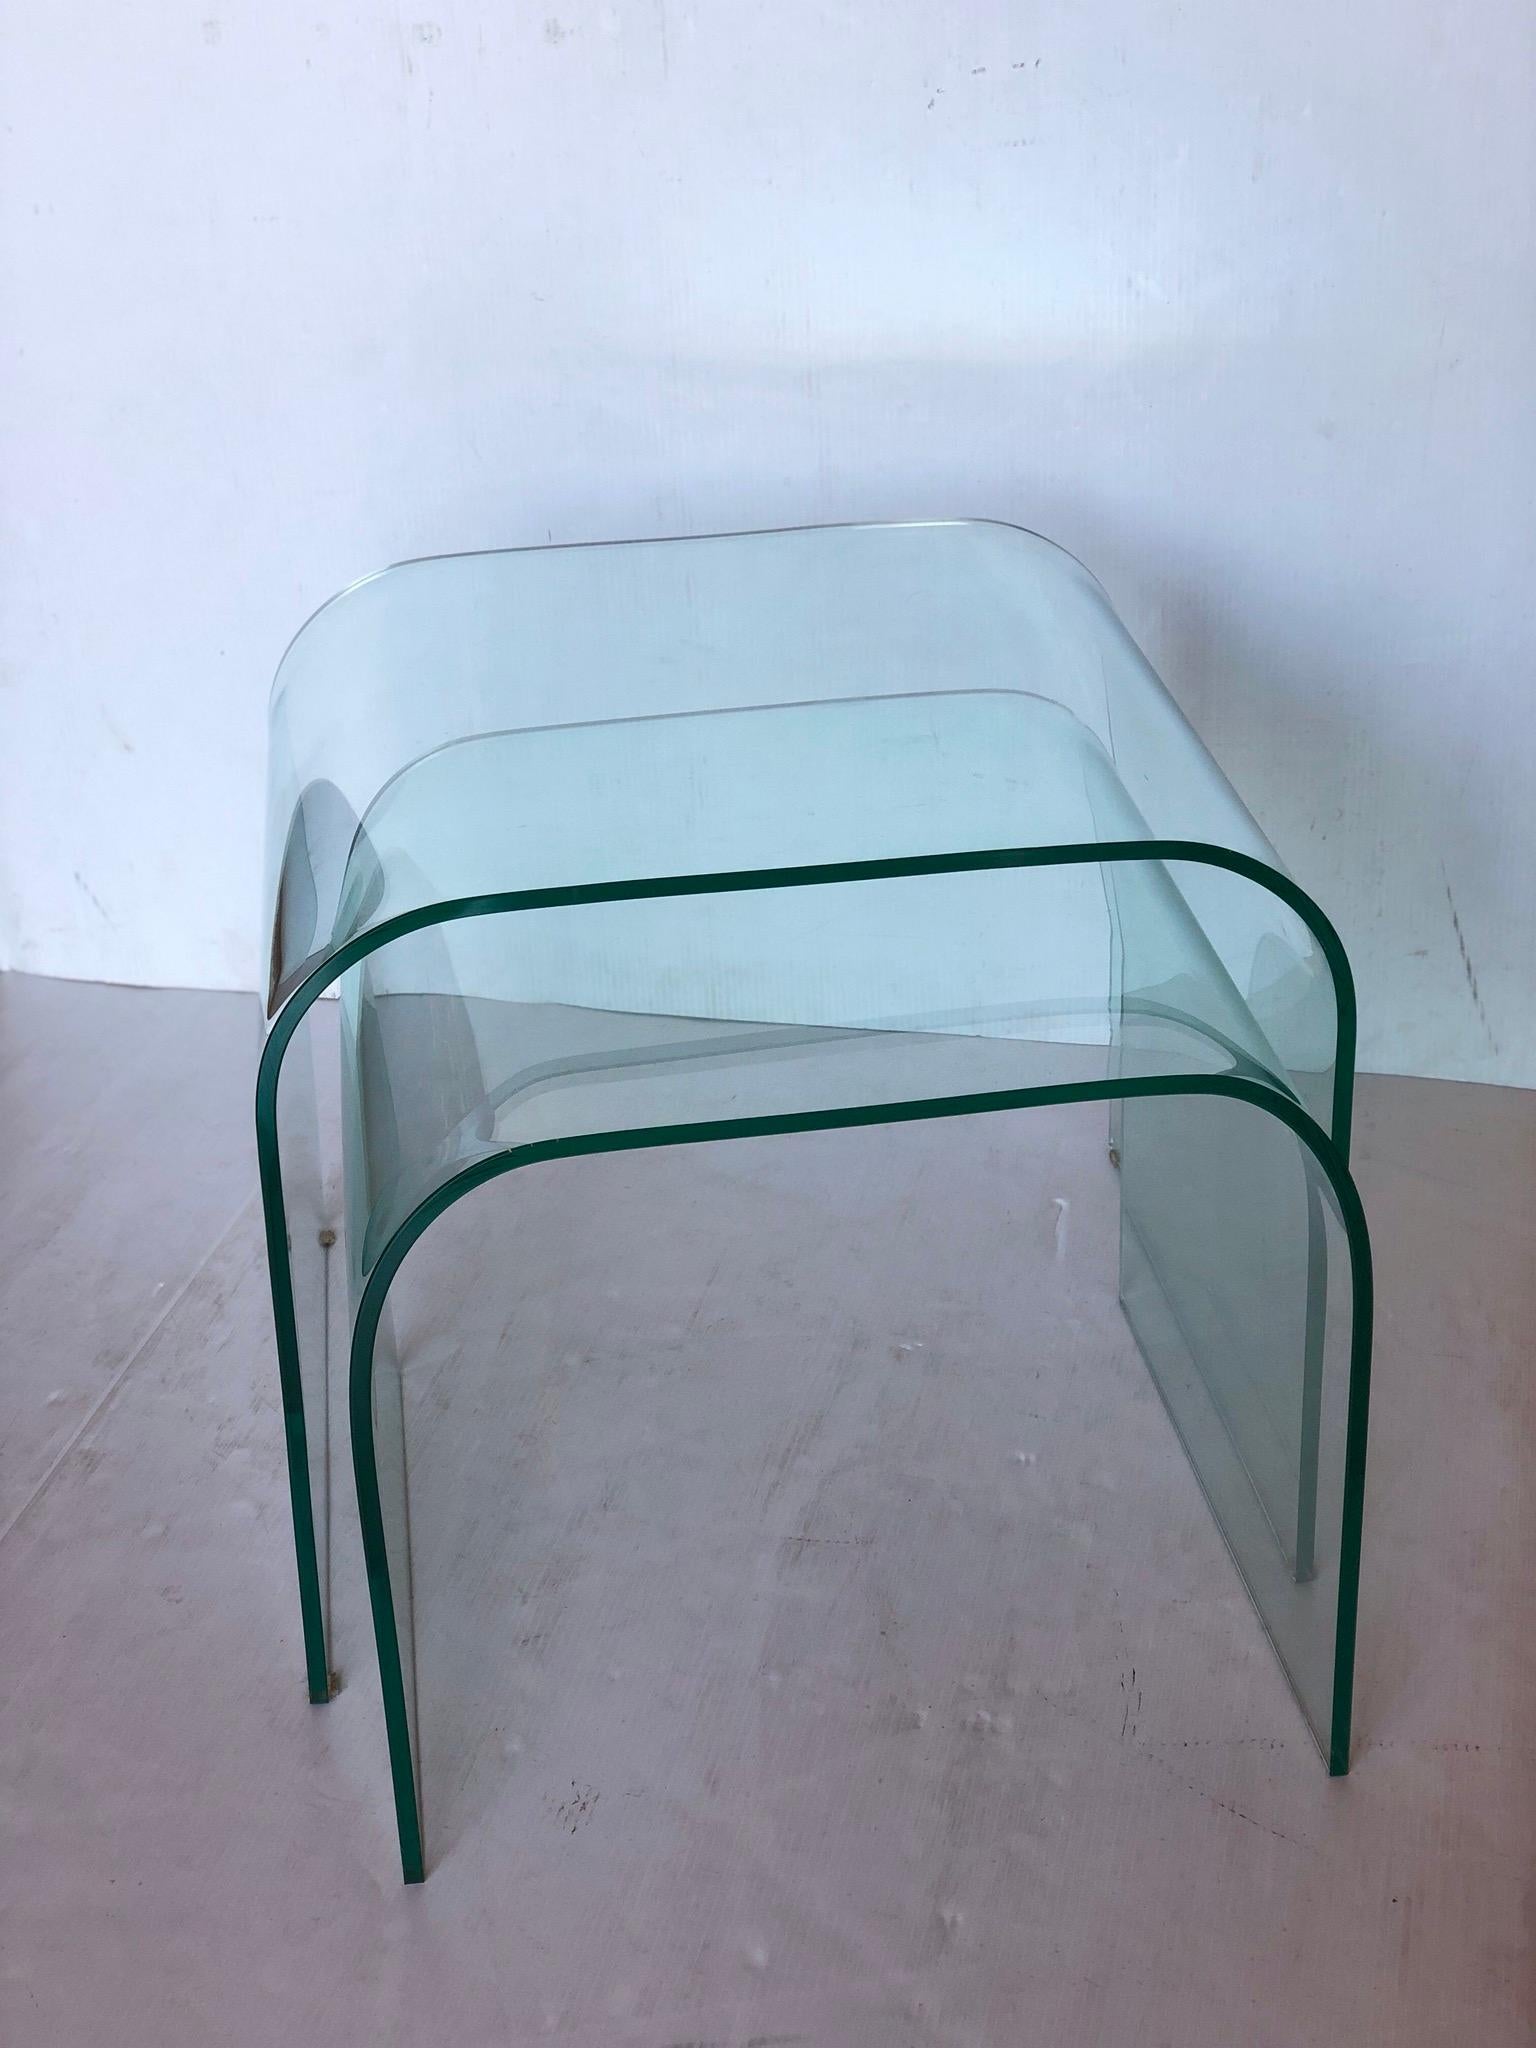 Minimalist pair of Italian molded glass nesting or drinks tables designed by Angelo Cortesi for Fiam Italia. Each has a modern waterfall design made of bent crystal glass and each is signed on the corner by Cortesi. Beautifully constructed, also